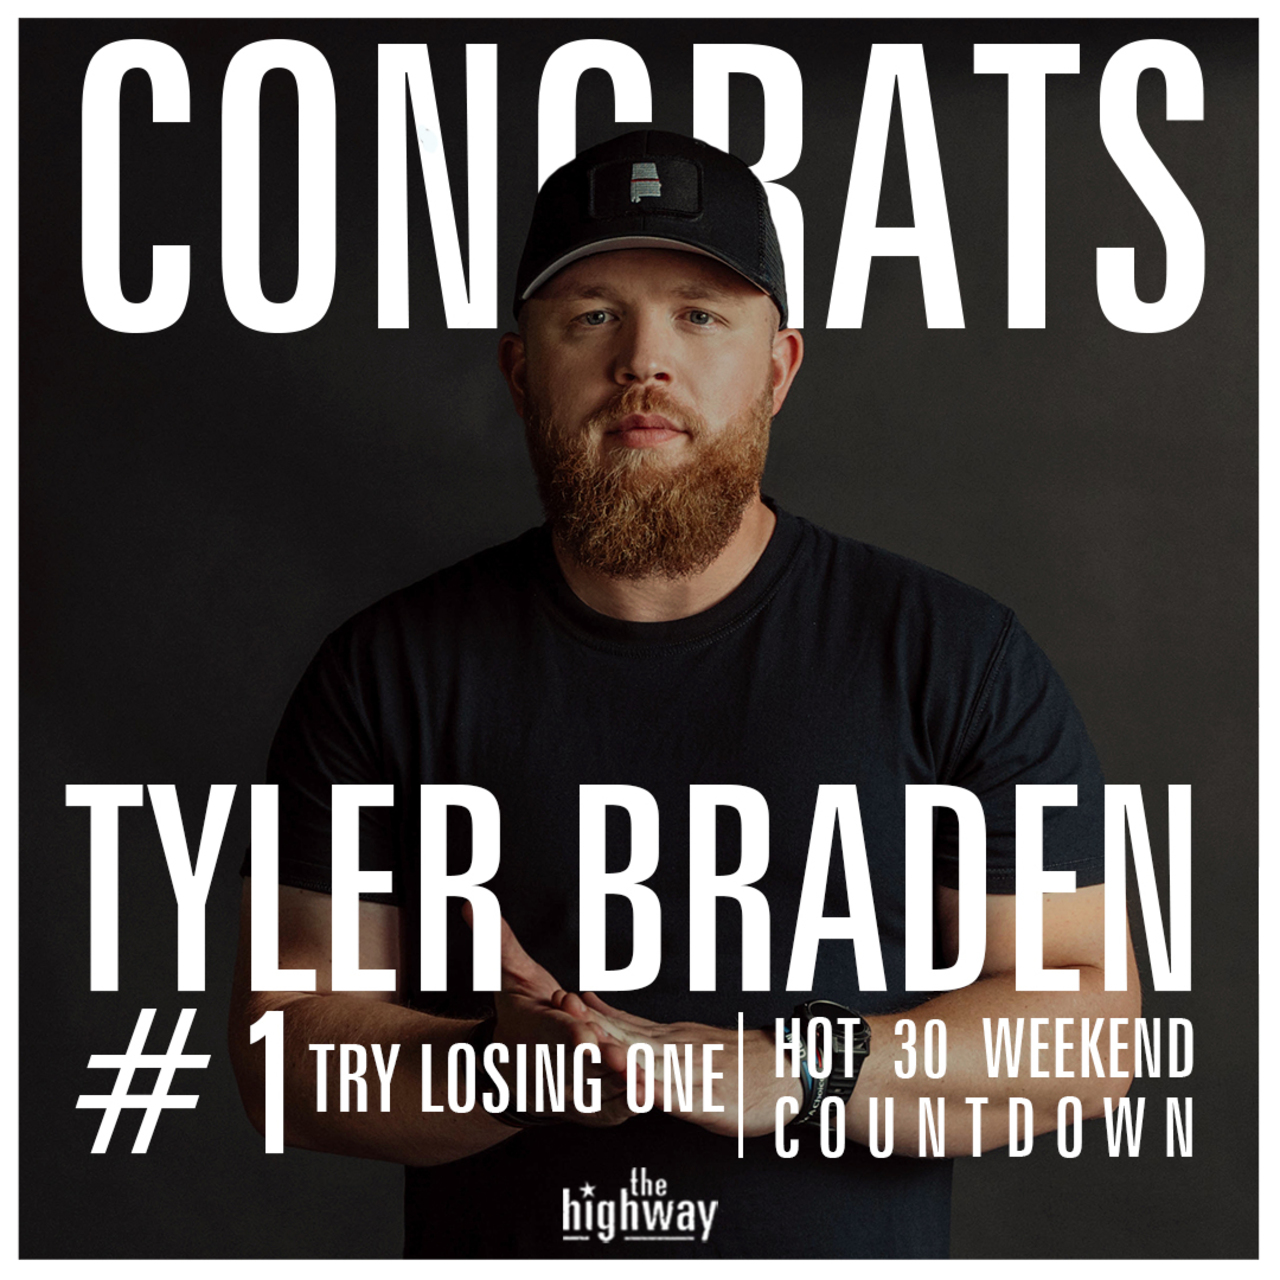 TYLER BRADEN IS NO. 1 ON SIRIUSXM’S THE HIGHWAY HOT 30 COUNTDOWN WITH “TRY LOSING ONE”